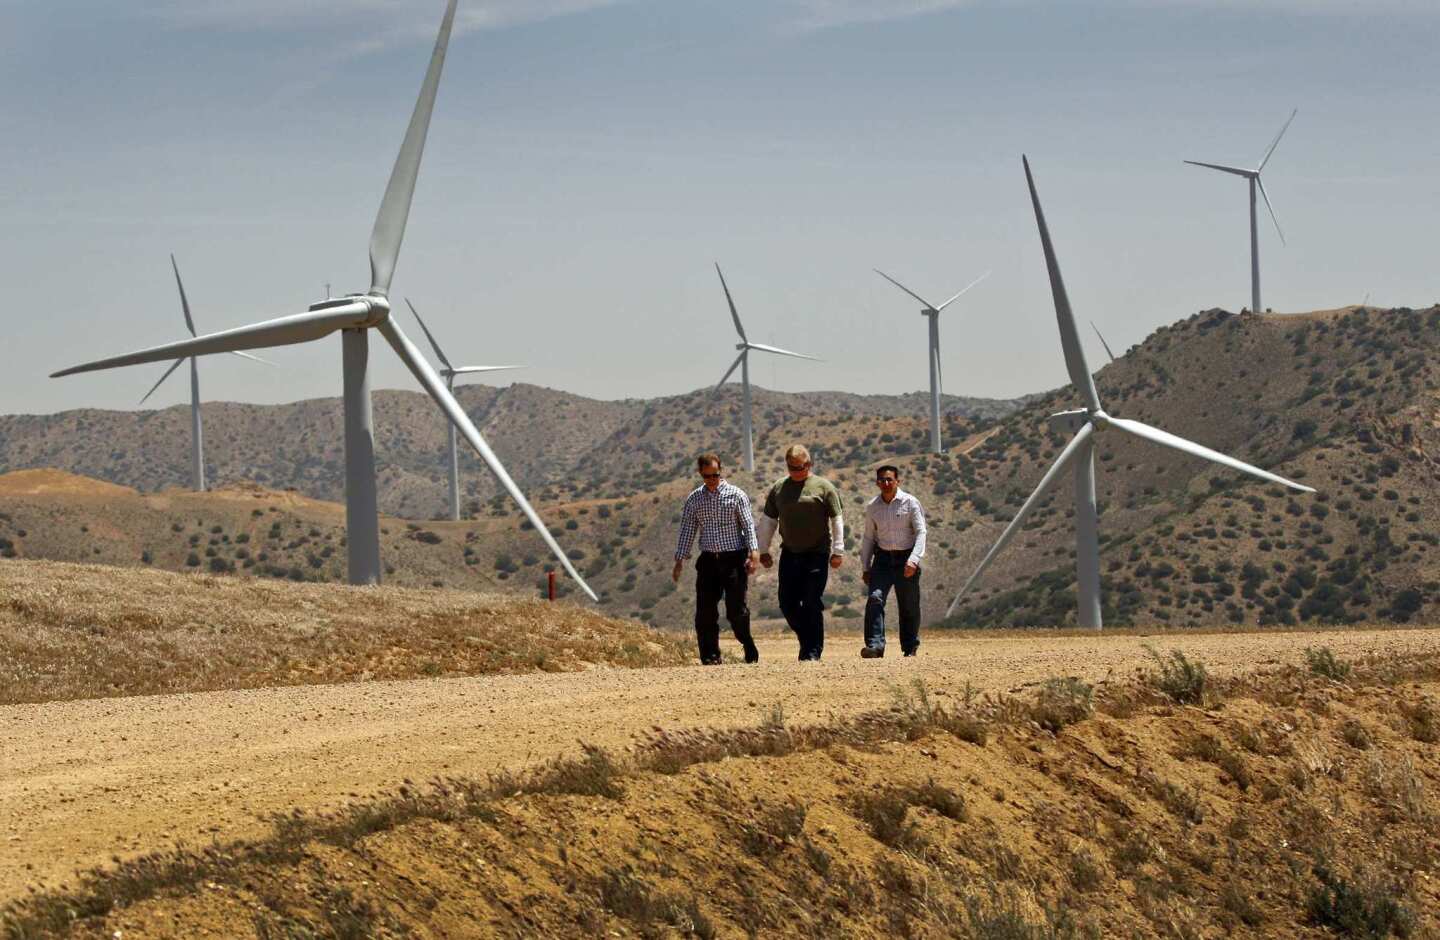 Mark Sedlacek, left, Chuck Holloway and Ken Silver of the Los Angeles Department of Water and Power walk among the wind turbines at the Pine Tree wind farm in the Tehachapi Mountains. Wind energy farms are being approved across ridgelines used by endangered condors and federally protected eagles. Recently, renewable energy companies and federal biologists have been trying to develop technologies to prevent those birds and others from colliding with the turbine blades.